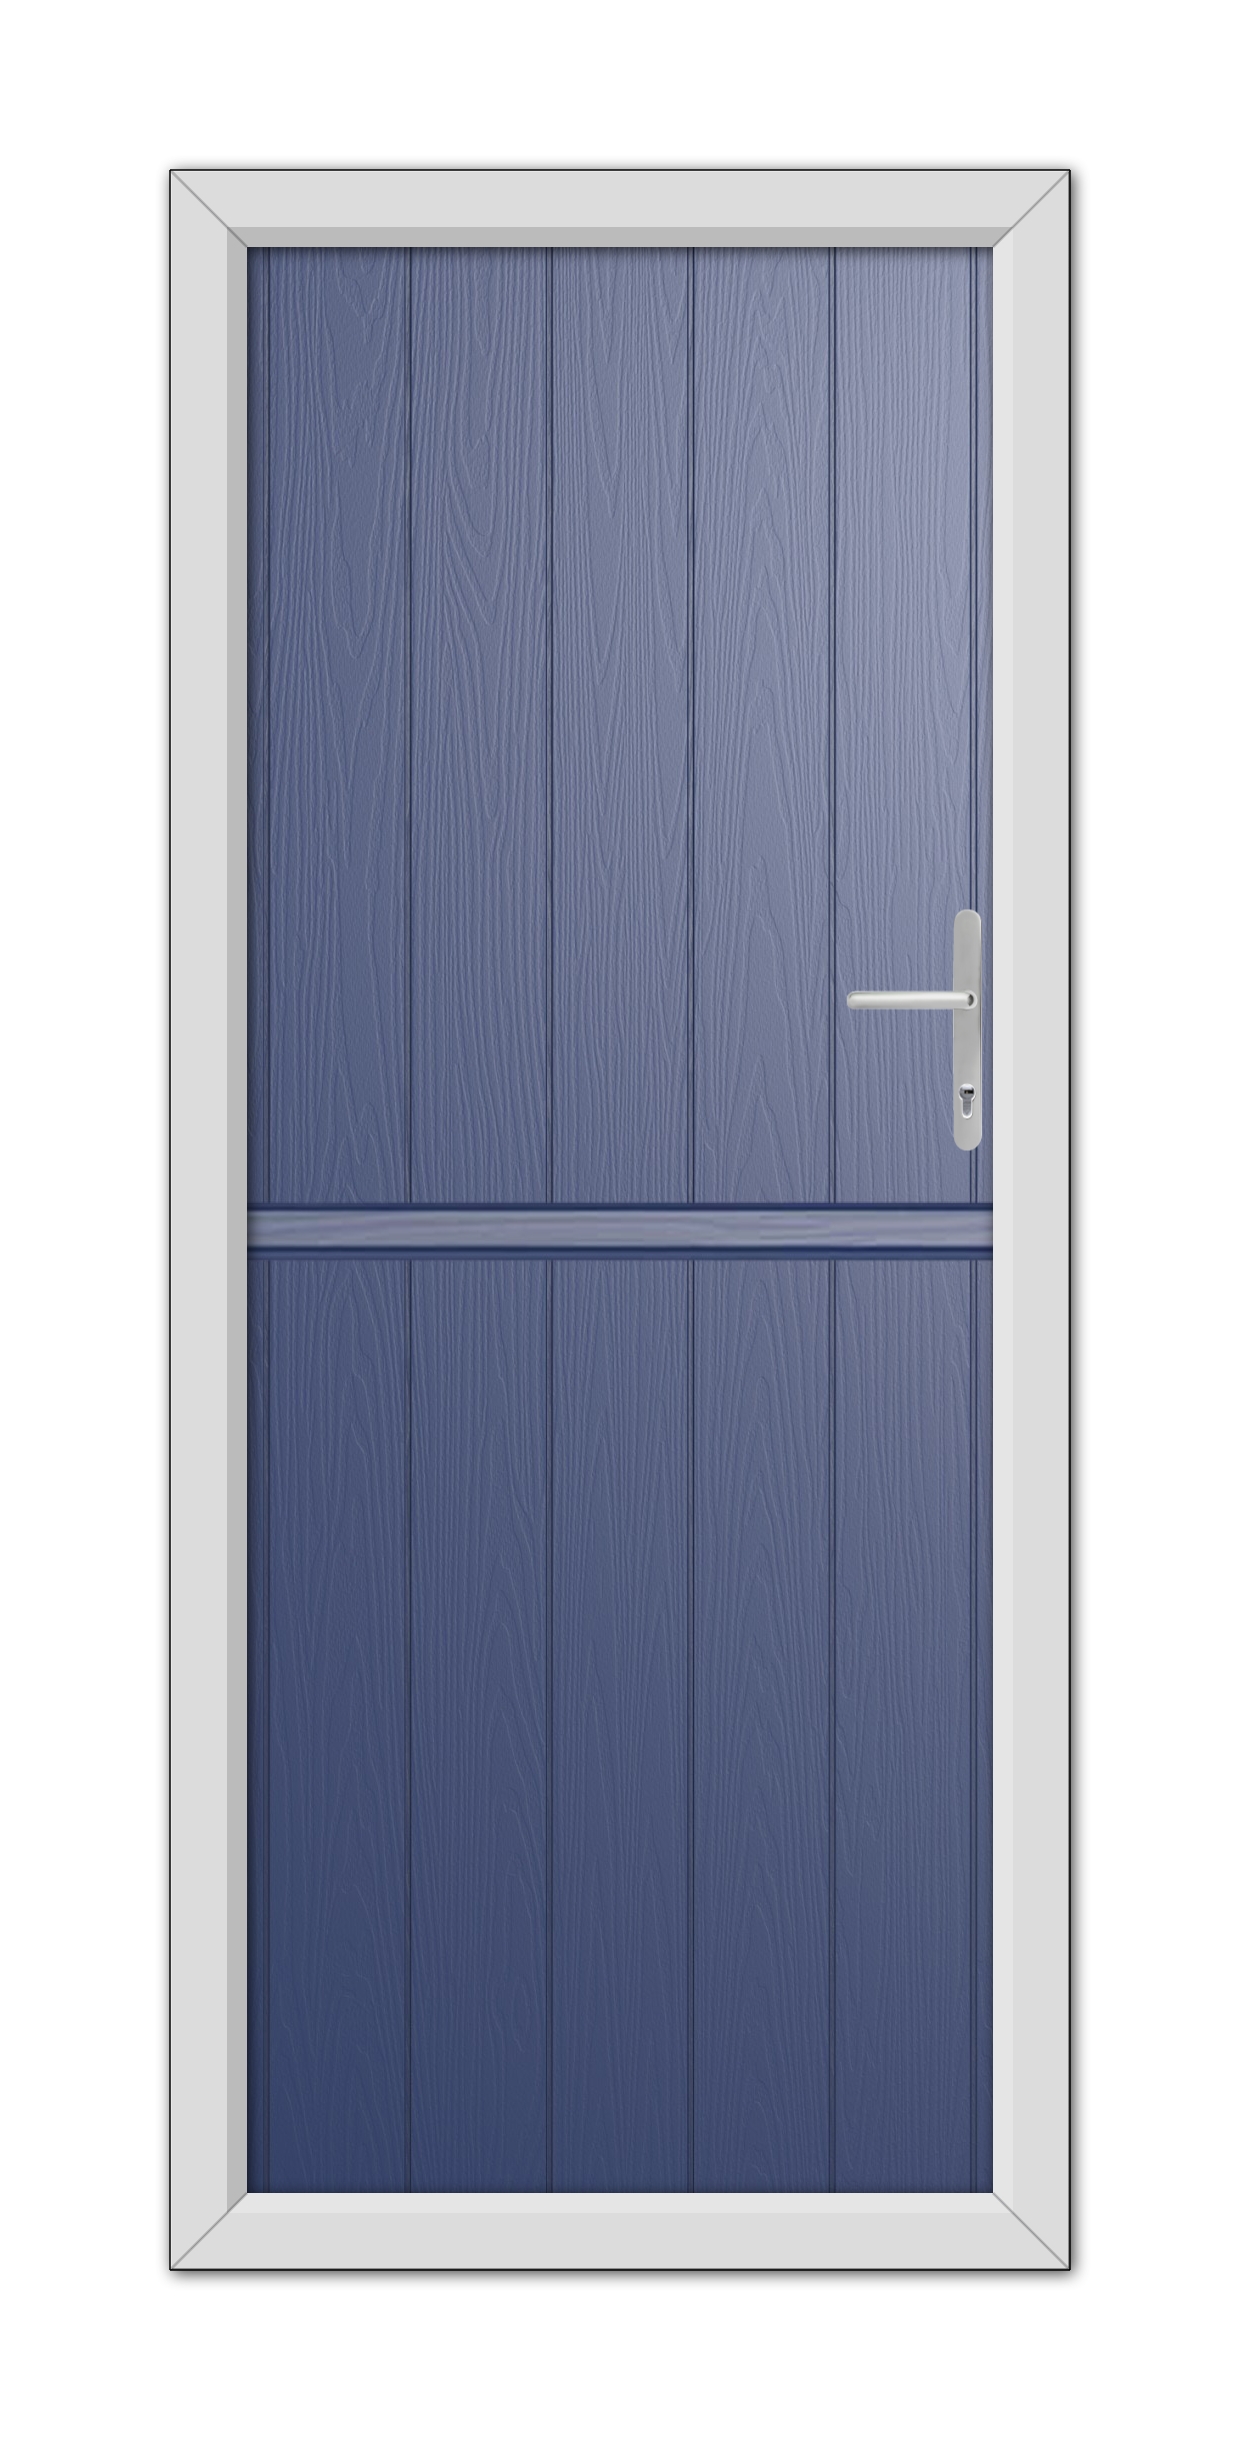 A Blue Gloucester Stable Composite Door 48mm Timber Core with a simple white handle, framed by a white door frame, viewed head-on.